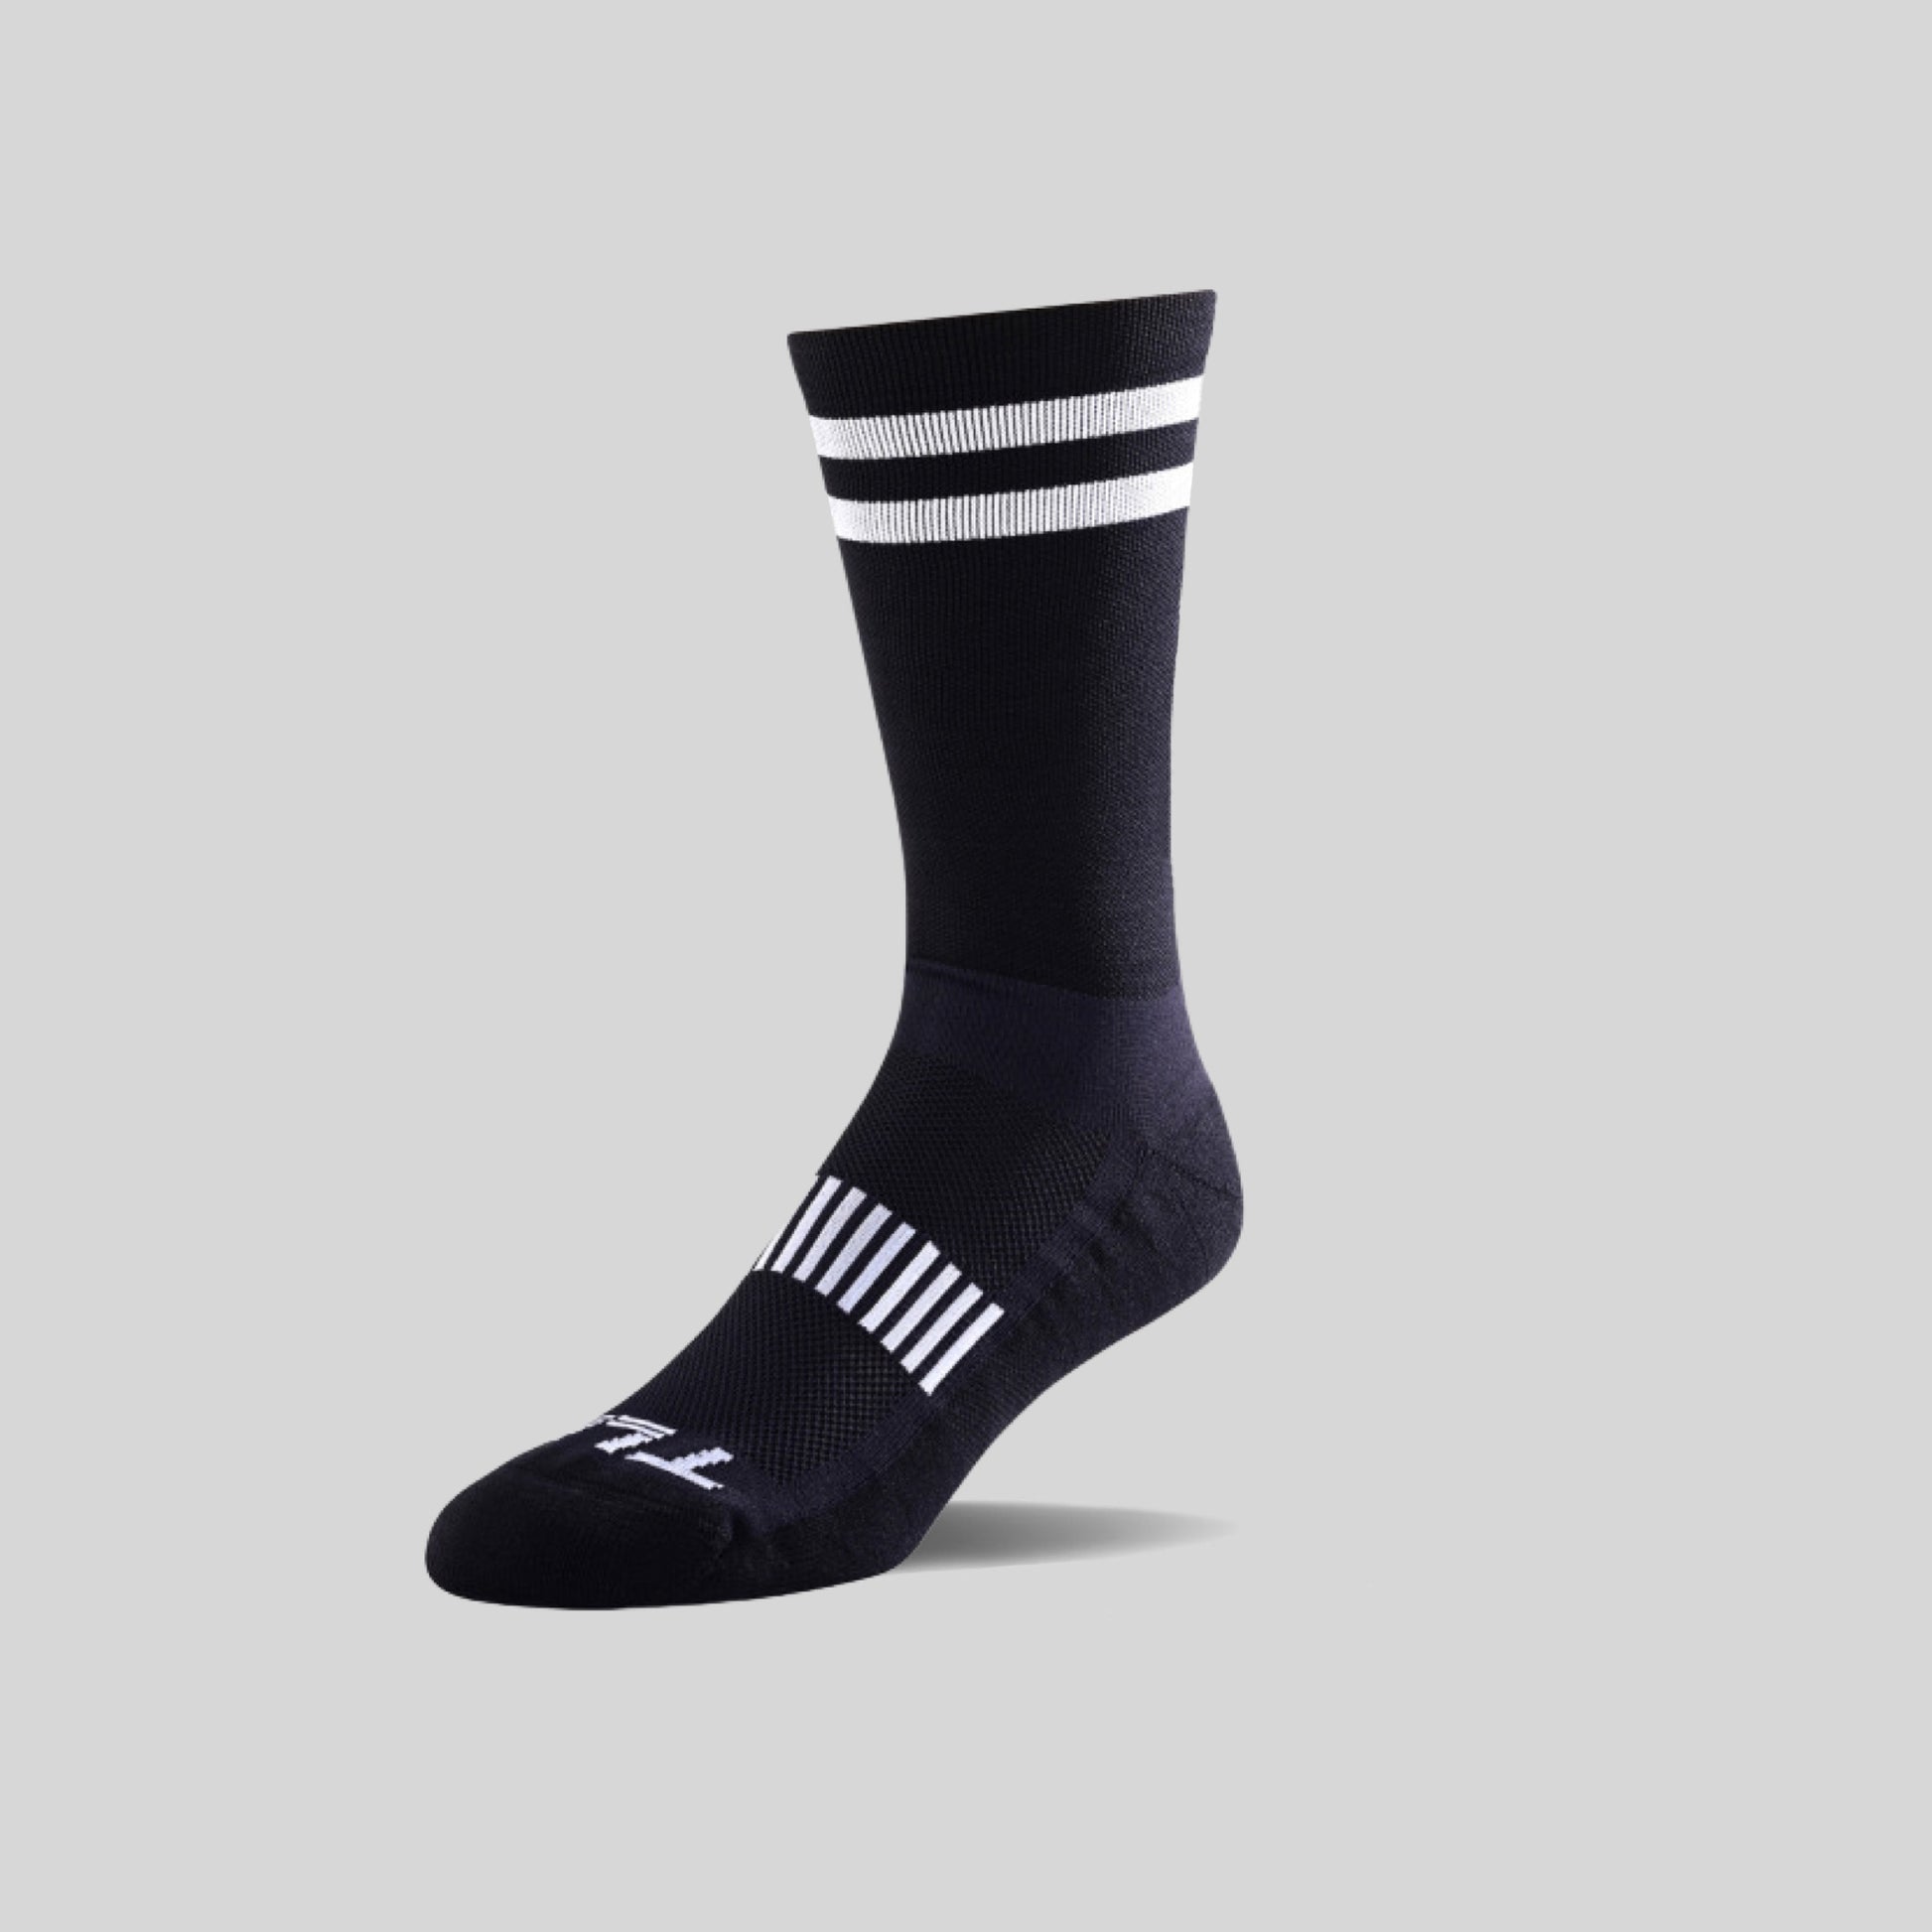 Troy Lee Designs Performance Speed Socks Black from Ascender Cycling Club Zürich Switzerland View Side